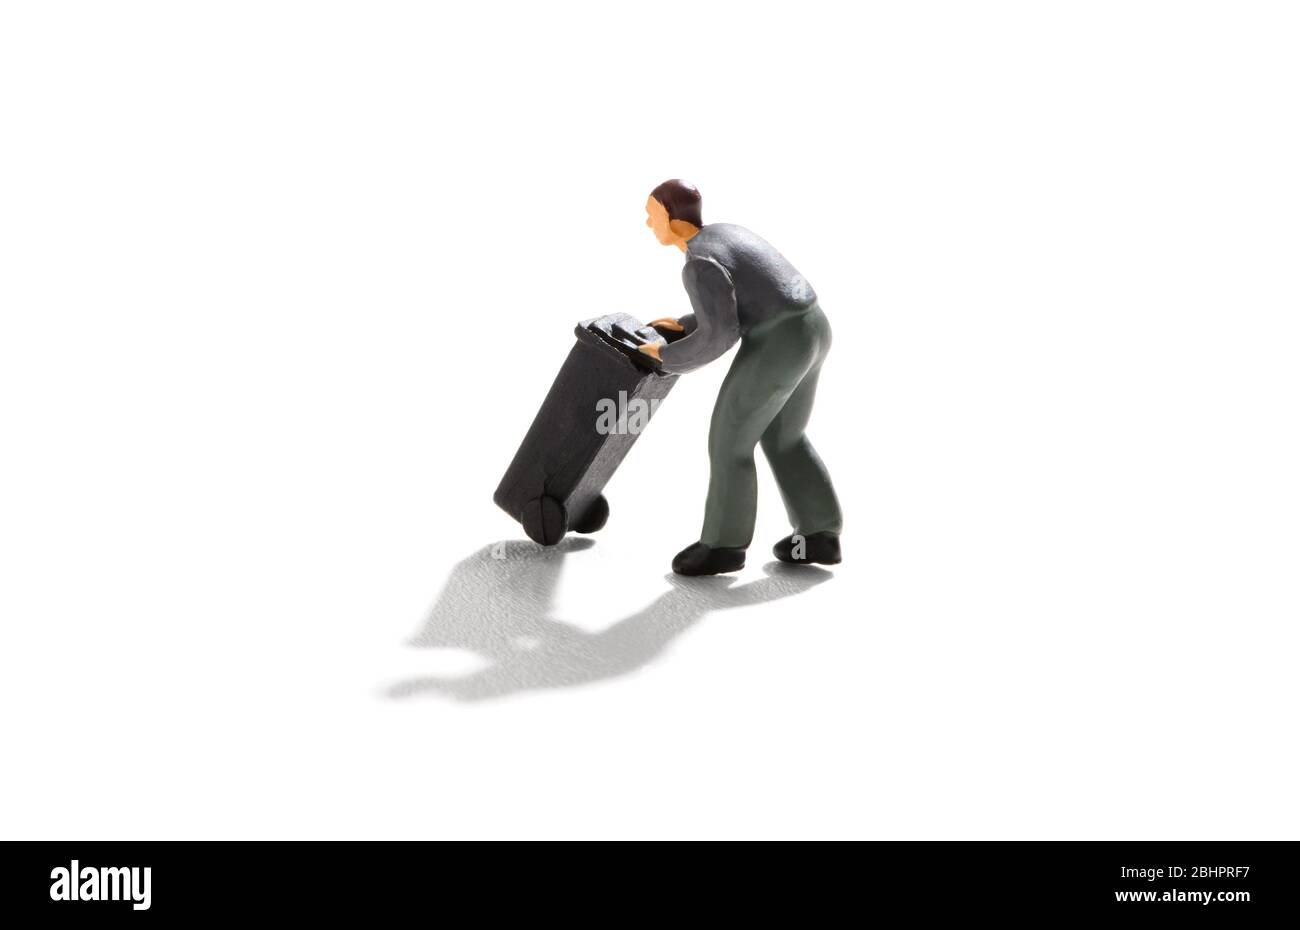 Miniature man pushing a black garbage bin or wheelie on a white background with drop shadow in a waste disposal concept Stock Photo